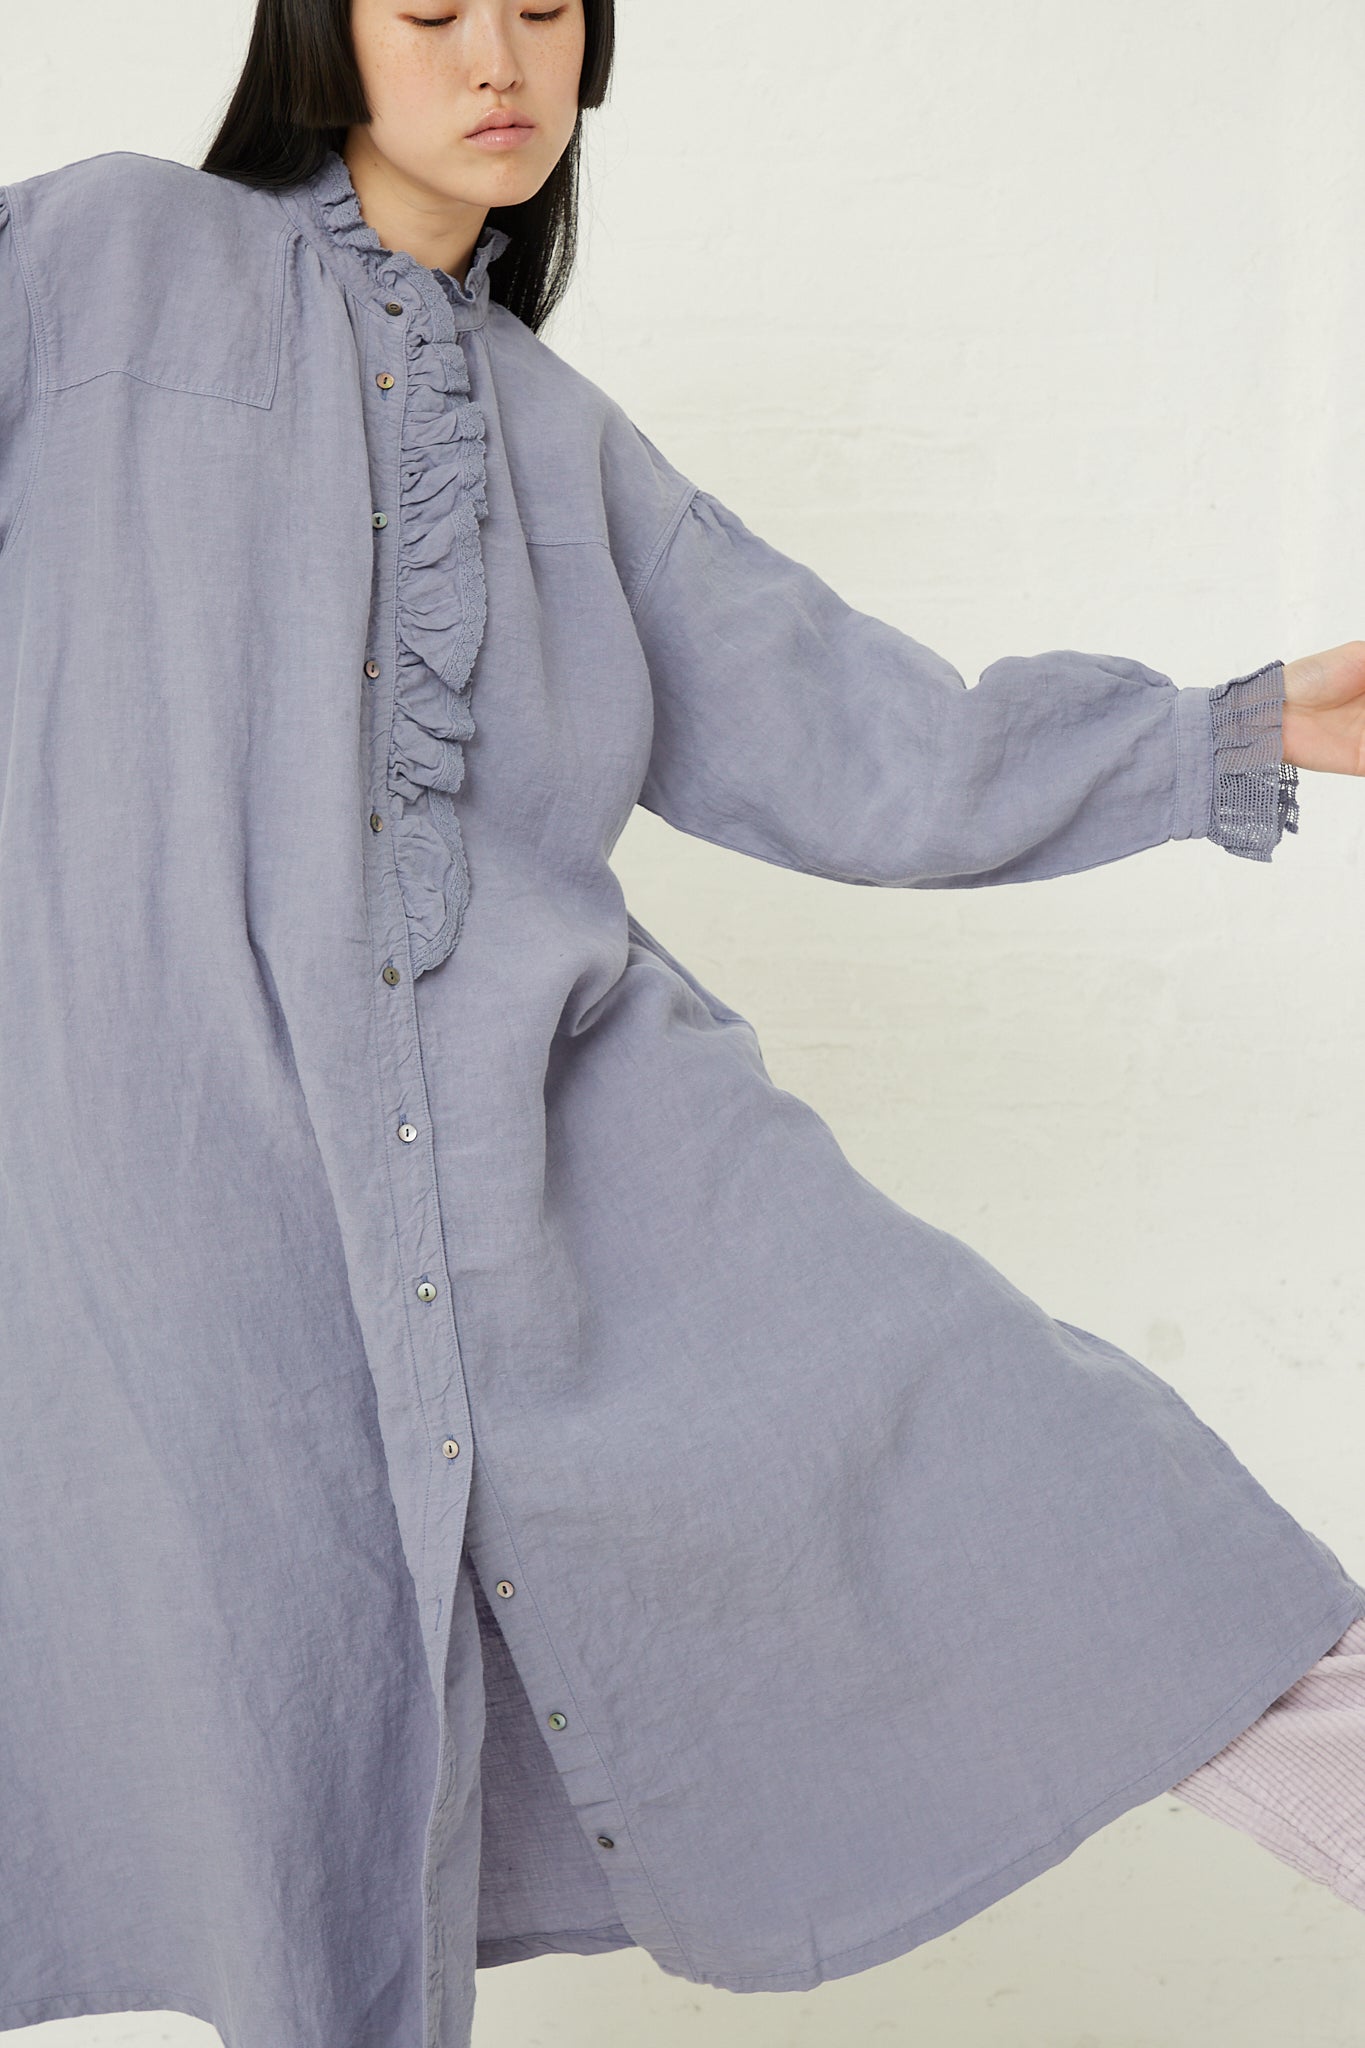 The model is wearing a nest Robe, Linen Cotton Lace Omi-Zarashi Dress in Lavender with ruffles.